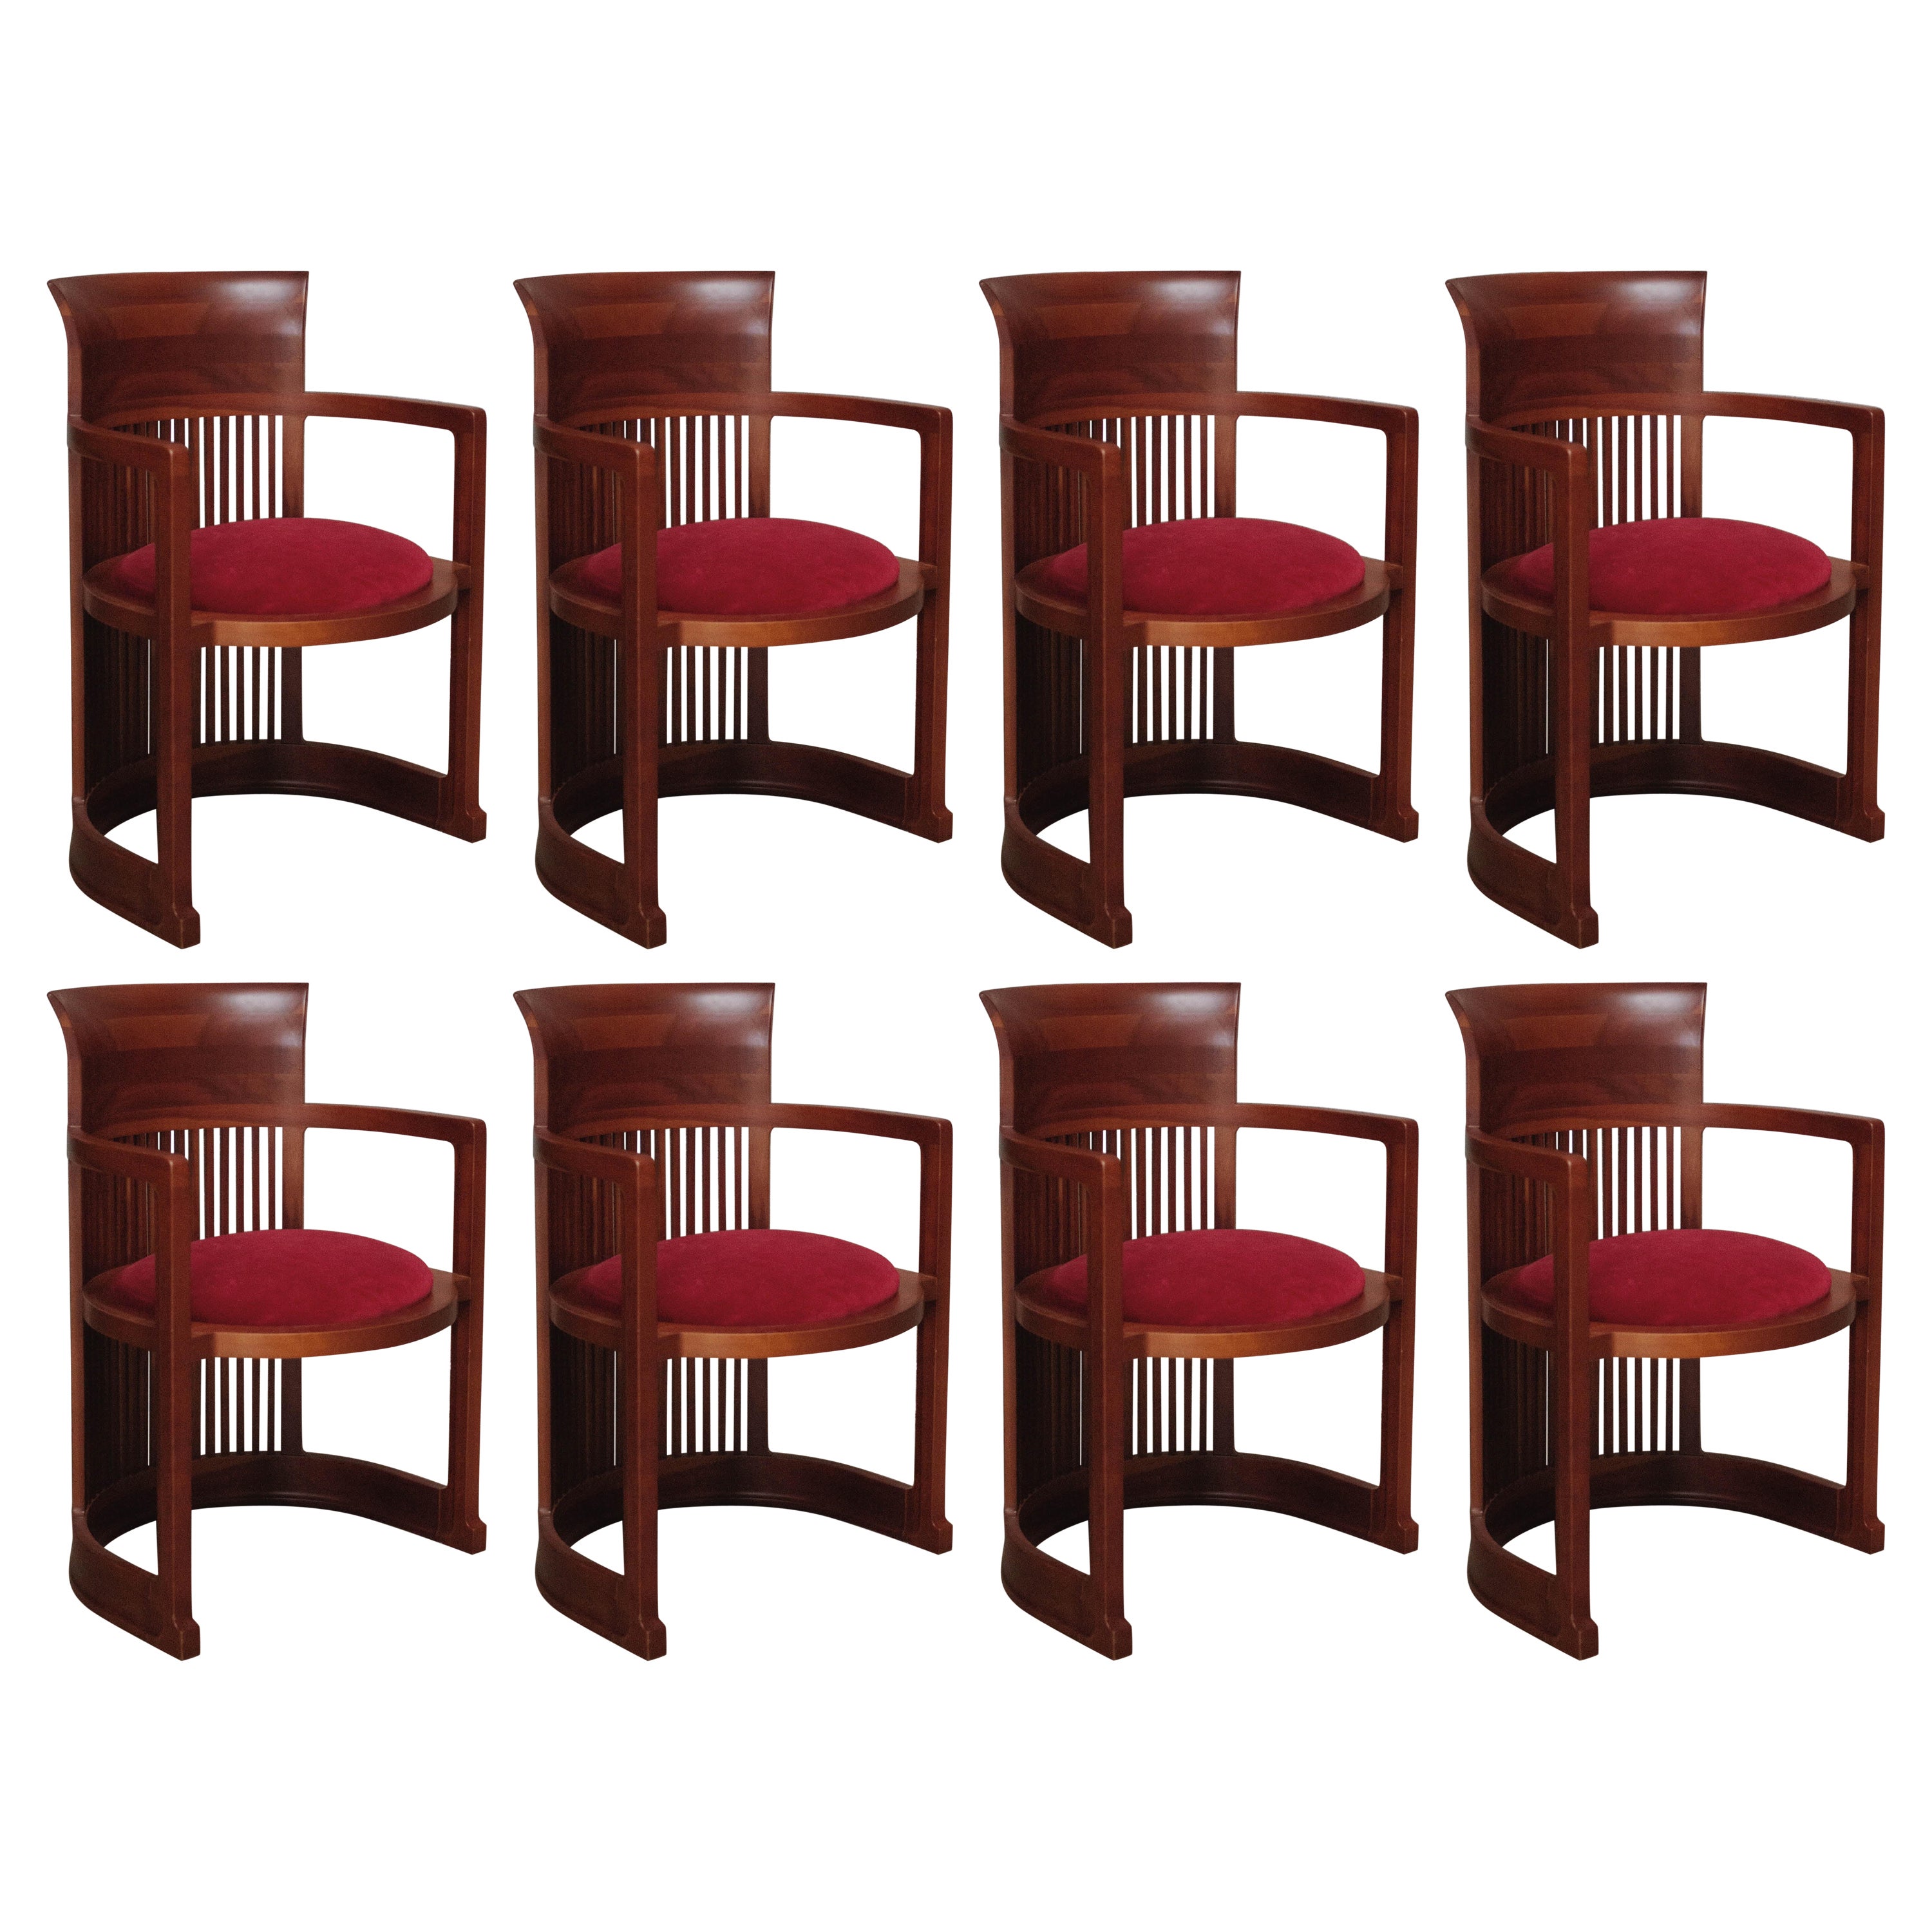 Frank Lloyd Wright "Barrel" Chairs for Cassina, 1937, Set of 8 For Sale